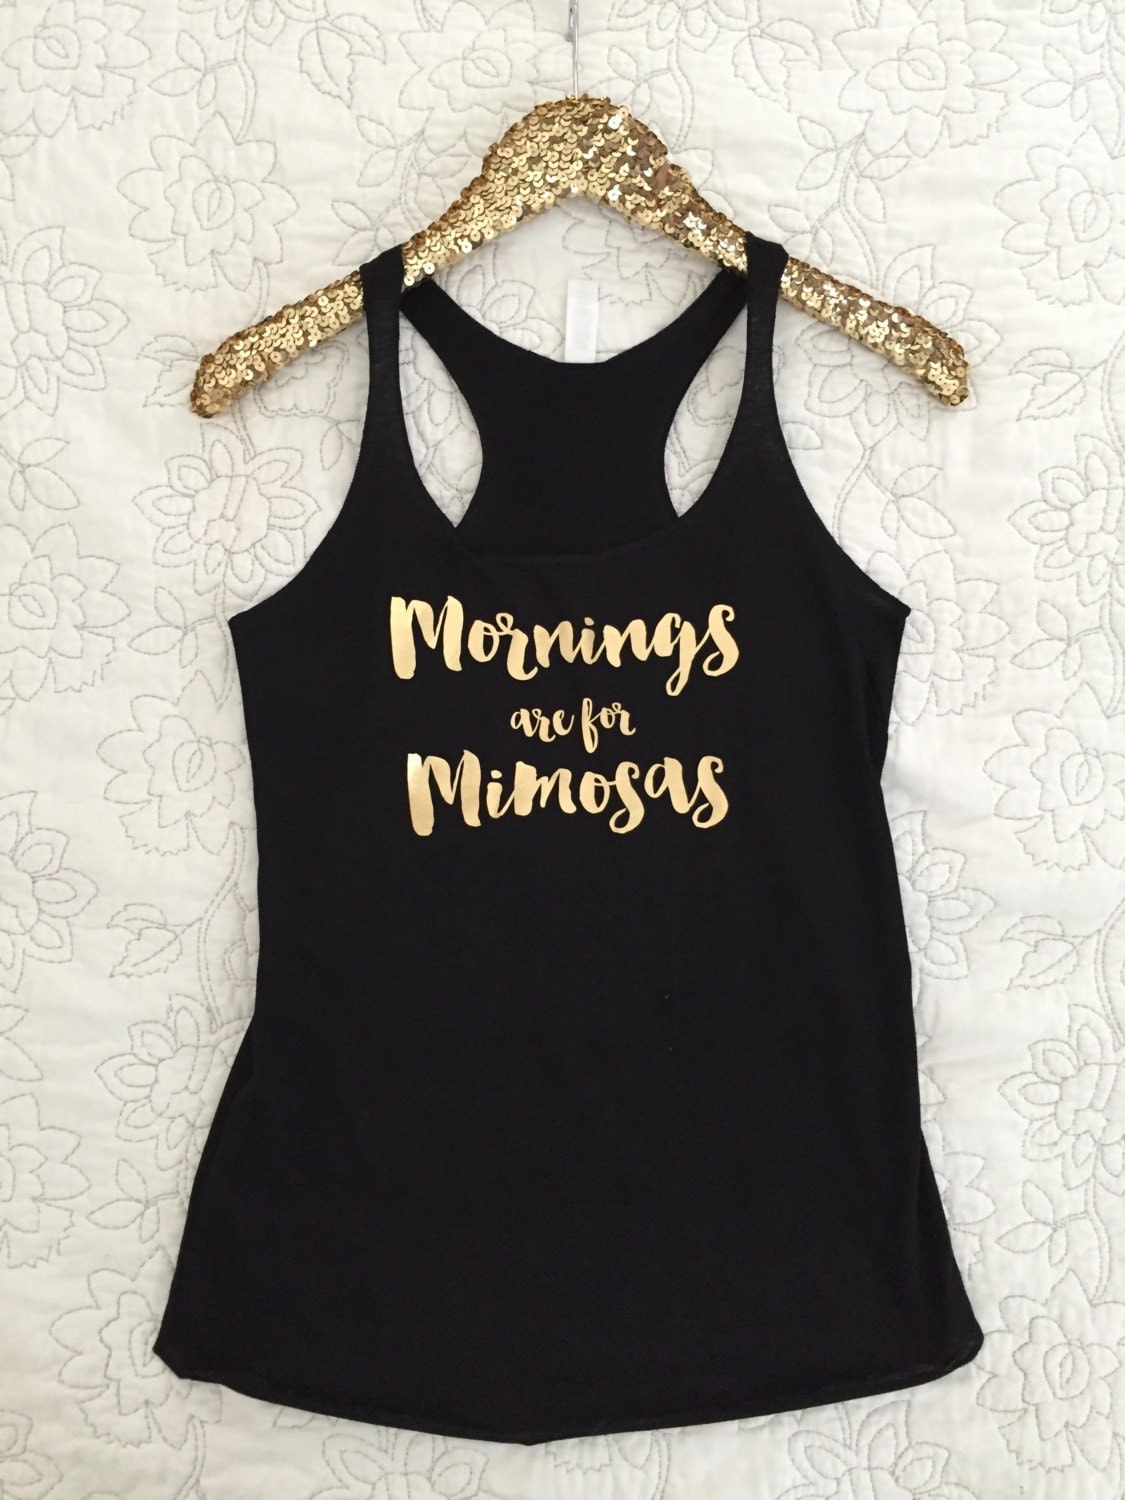 Bachelorette Party Tank Tops, Mornings are for Mimosas Racerback Tank Top // Bachelorette Party, Bachelorette, Bridesmaid, Bride / 6001